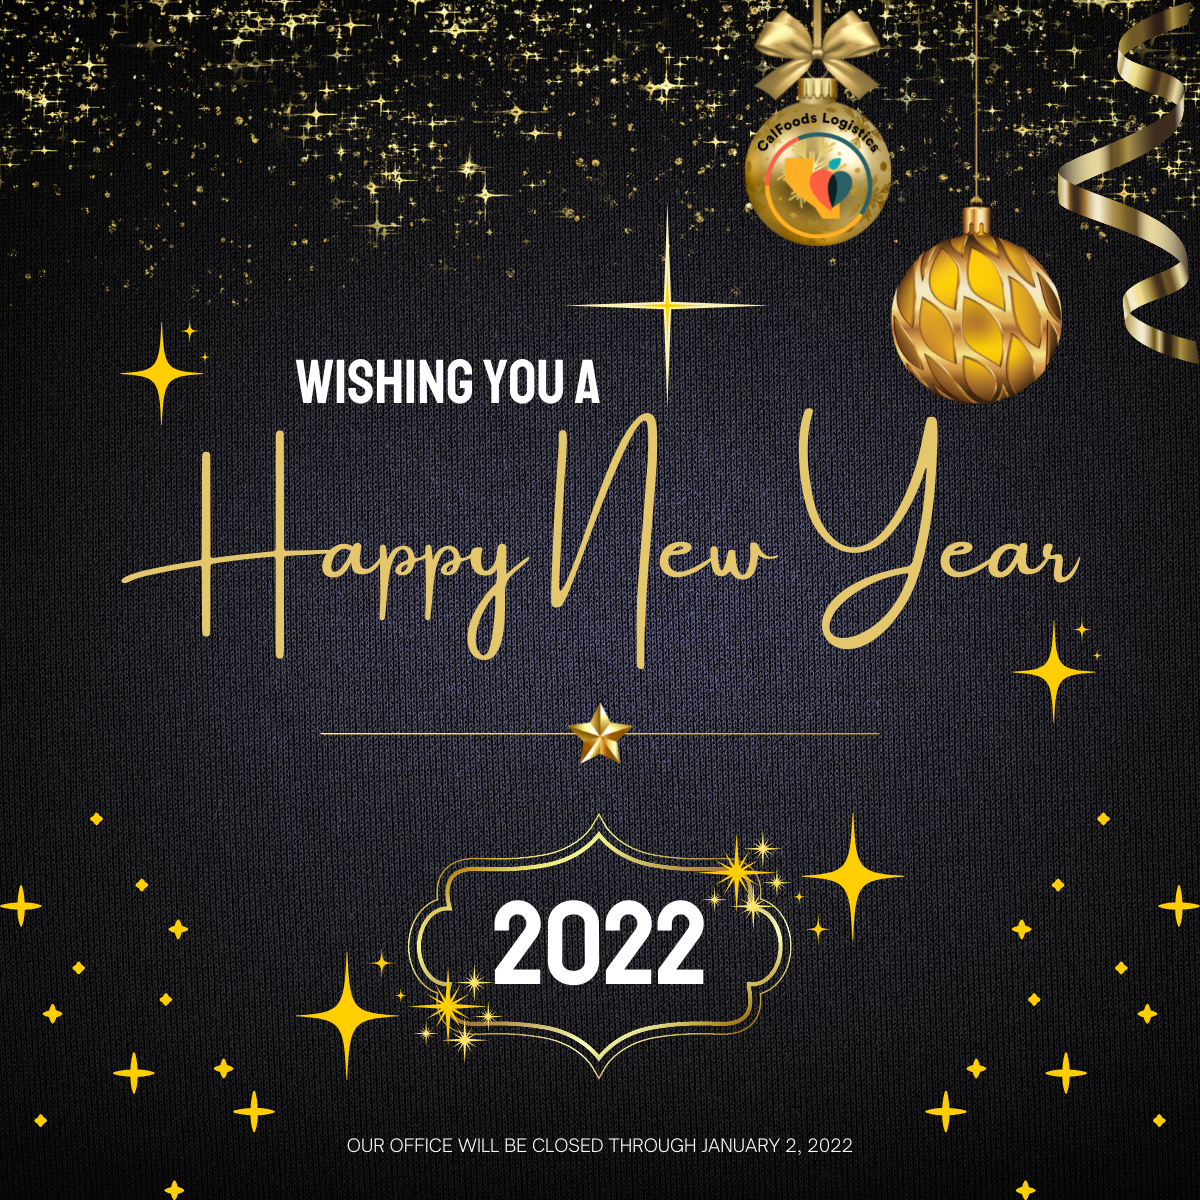 Happy New Year – A Bright Outlook For 2022